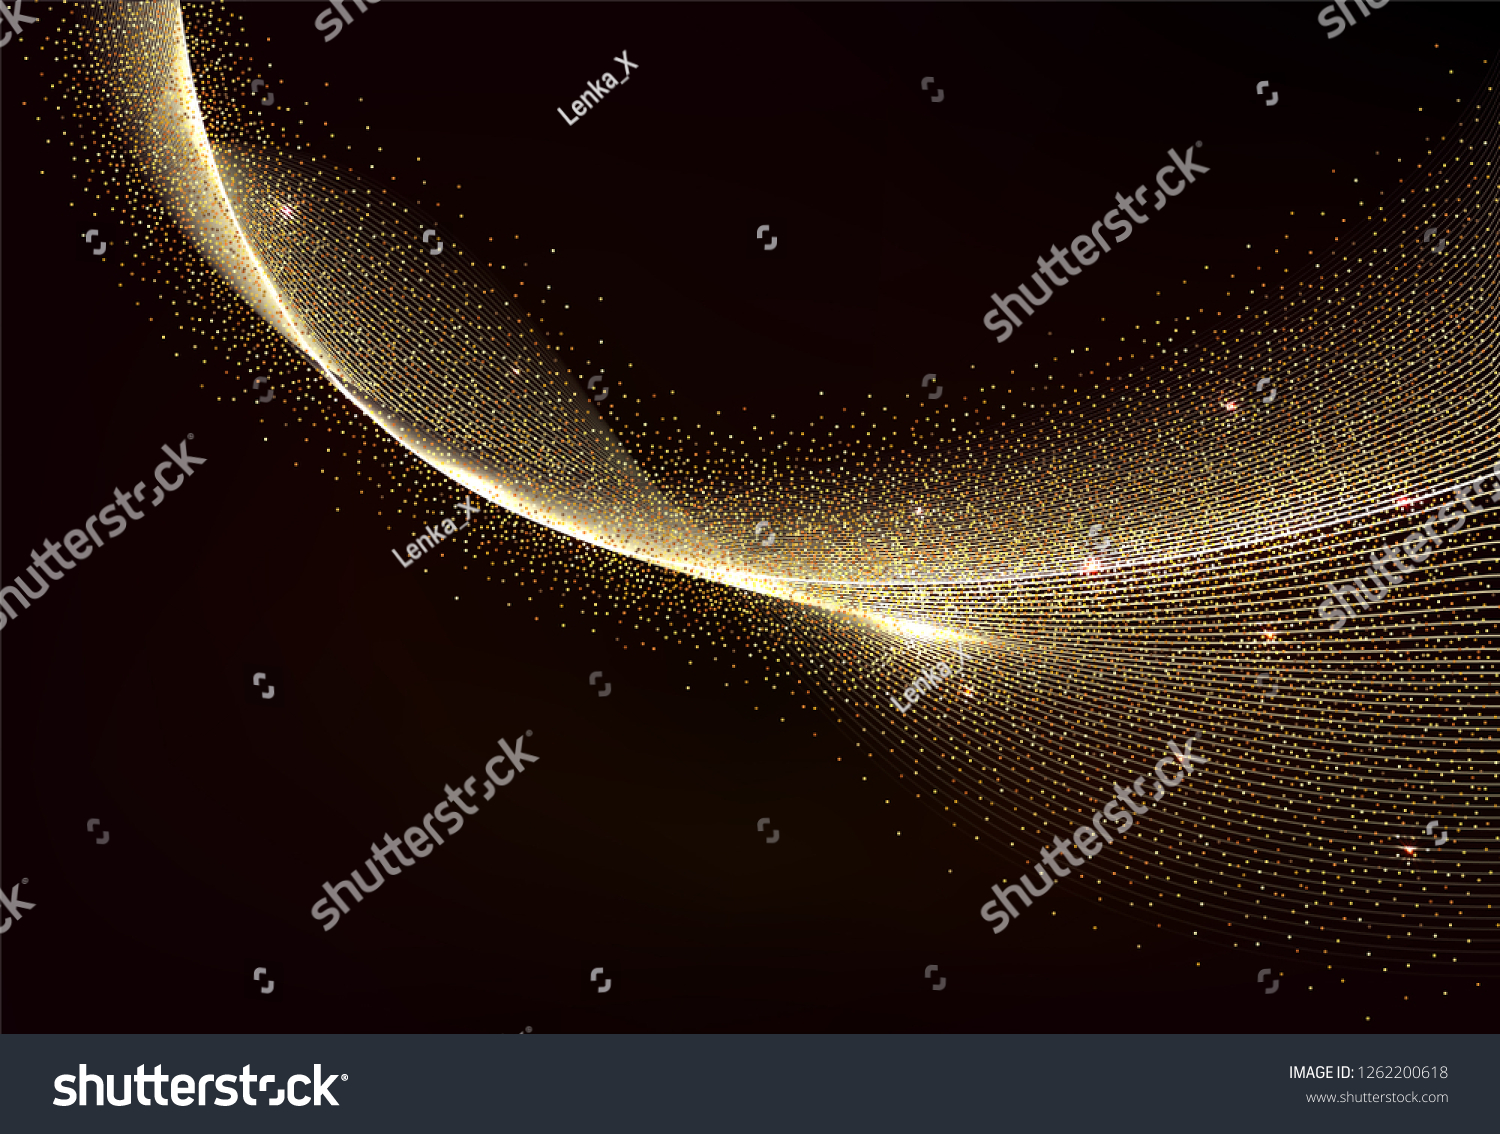 Golden Waves. Abstract gold Lines Design. Shiny moving strips design element with glitter effect on dark background for xmas christmas card. Vector Illustration #1262200618